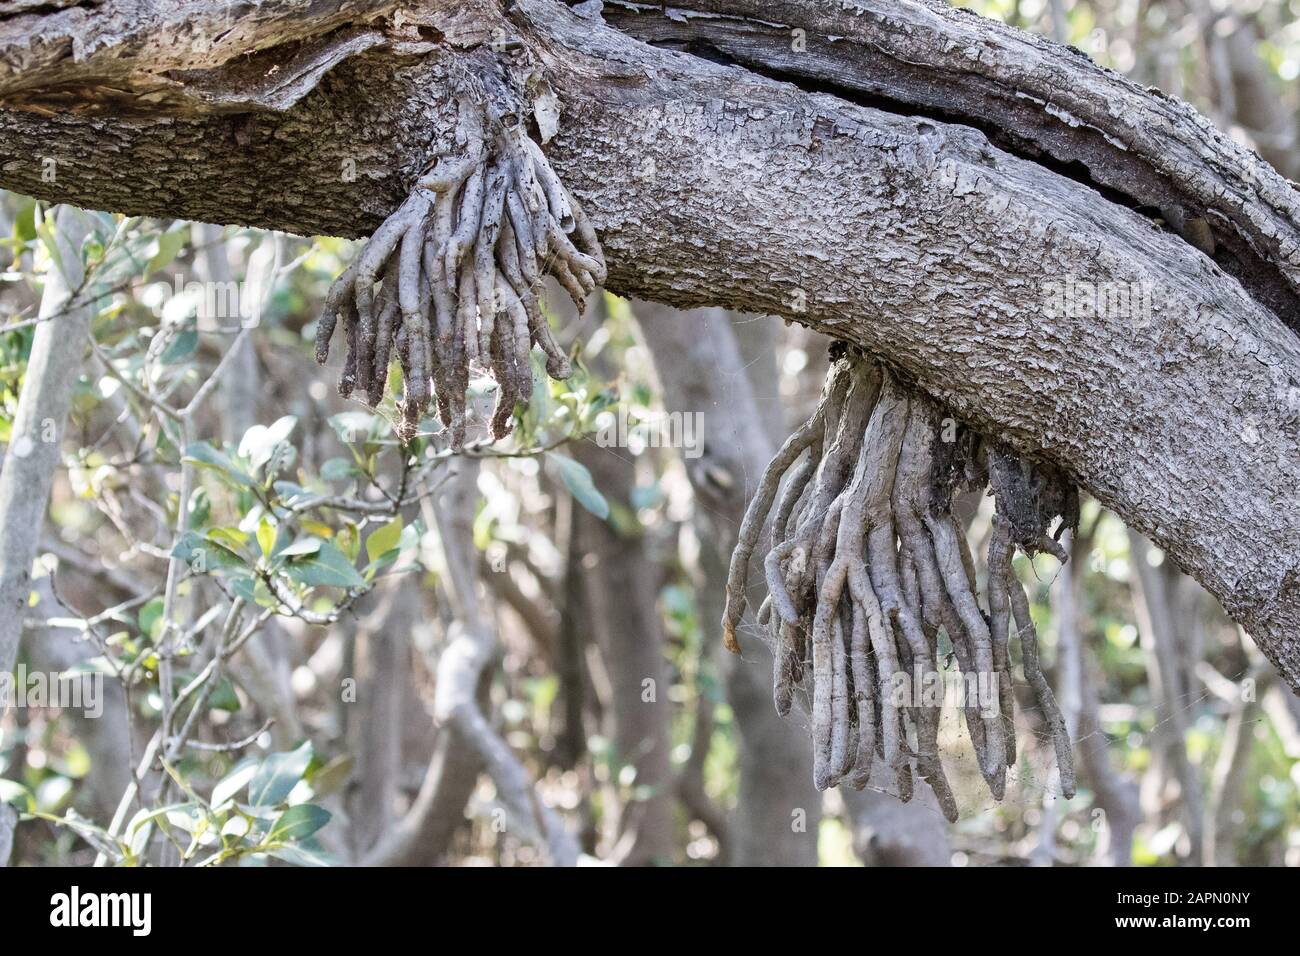 Arial Pneumatophore roots of a Mangrove Tree Stock Photo